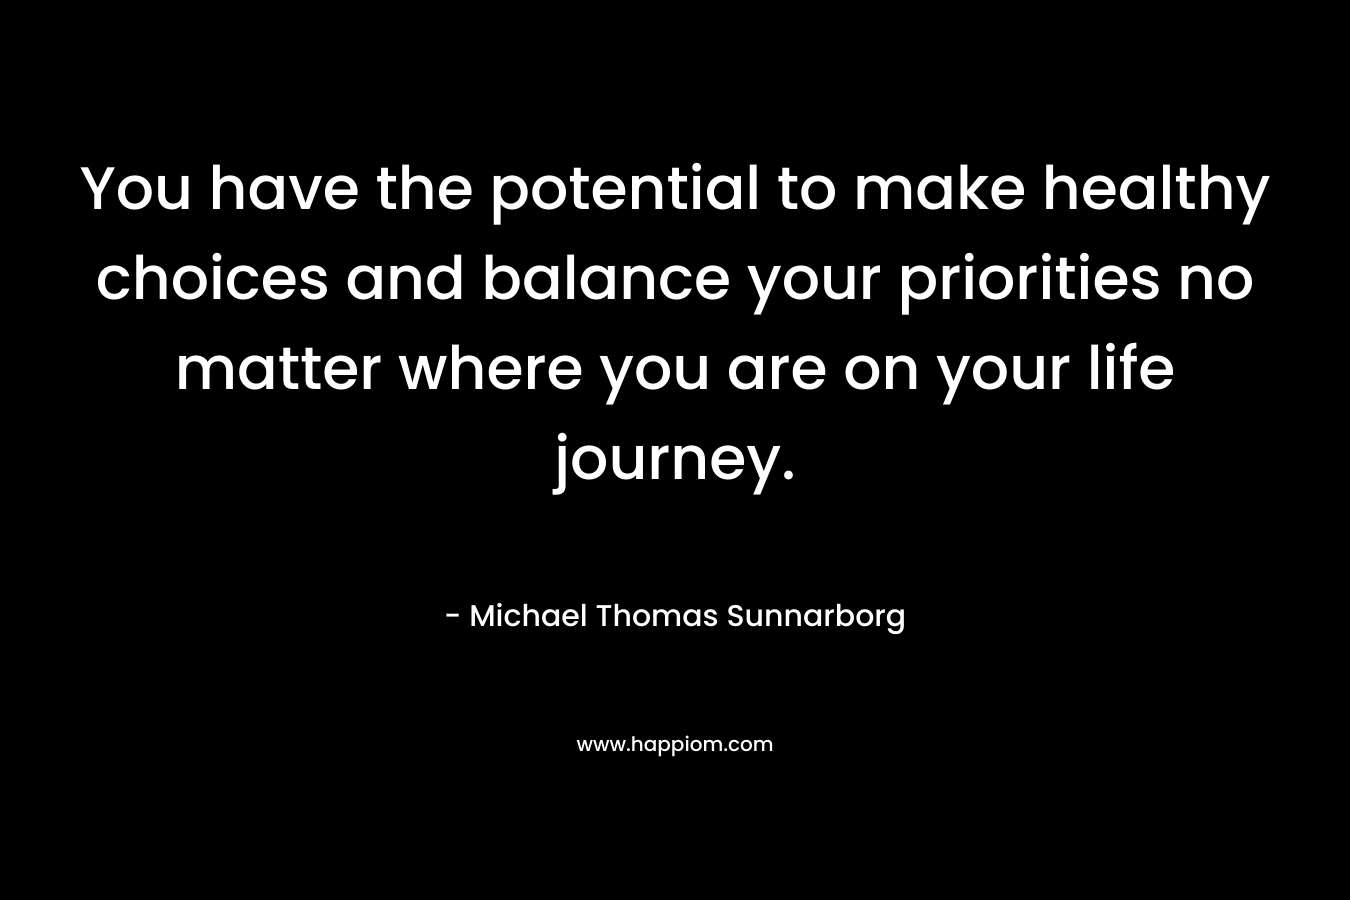 You have the potential to make healthy choices and balance your priorities no matter where you are on your life journey.